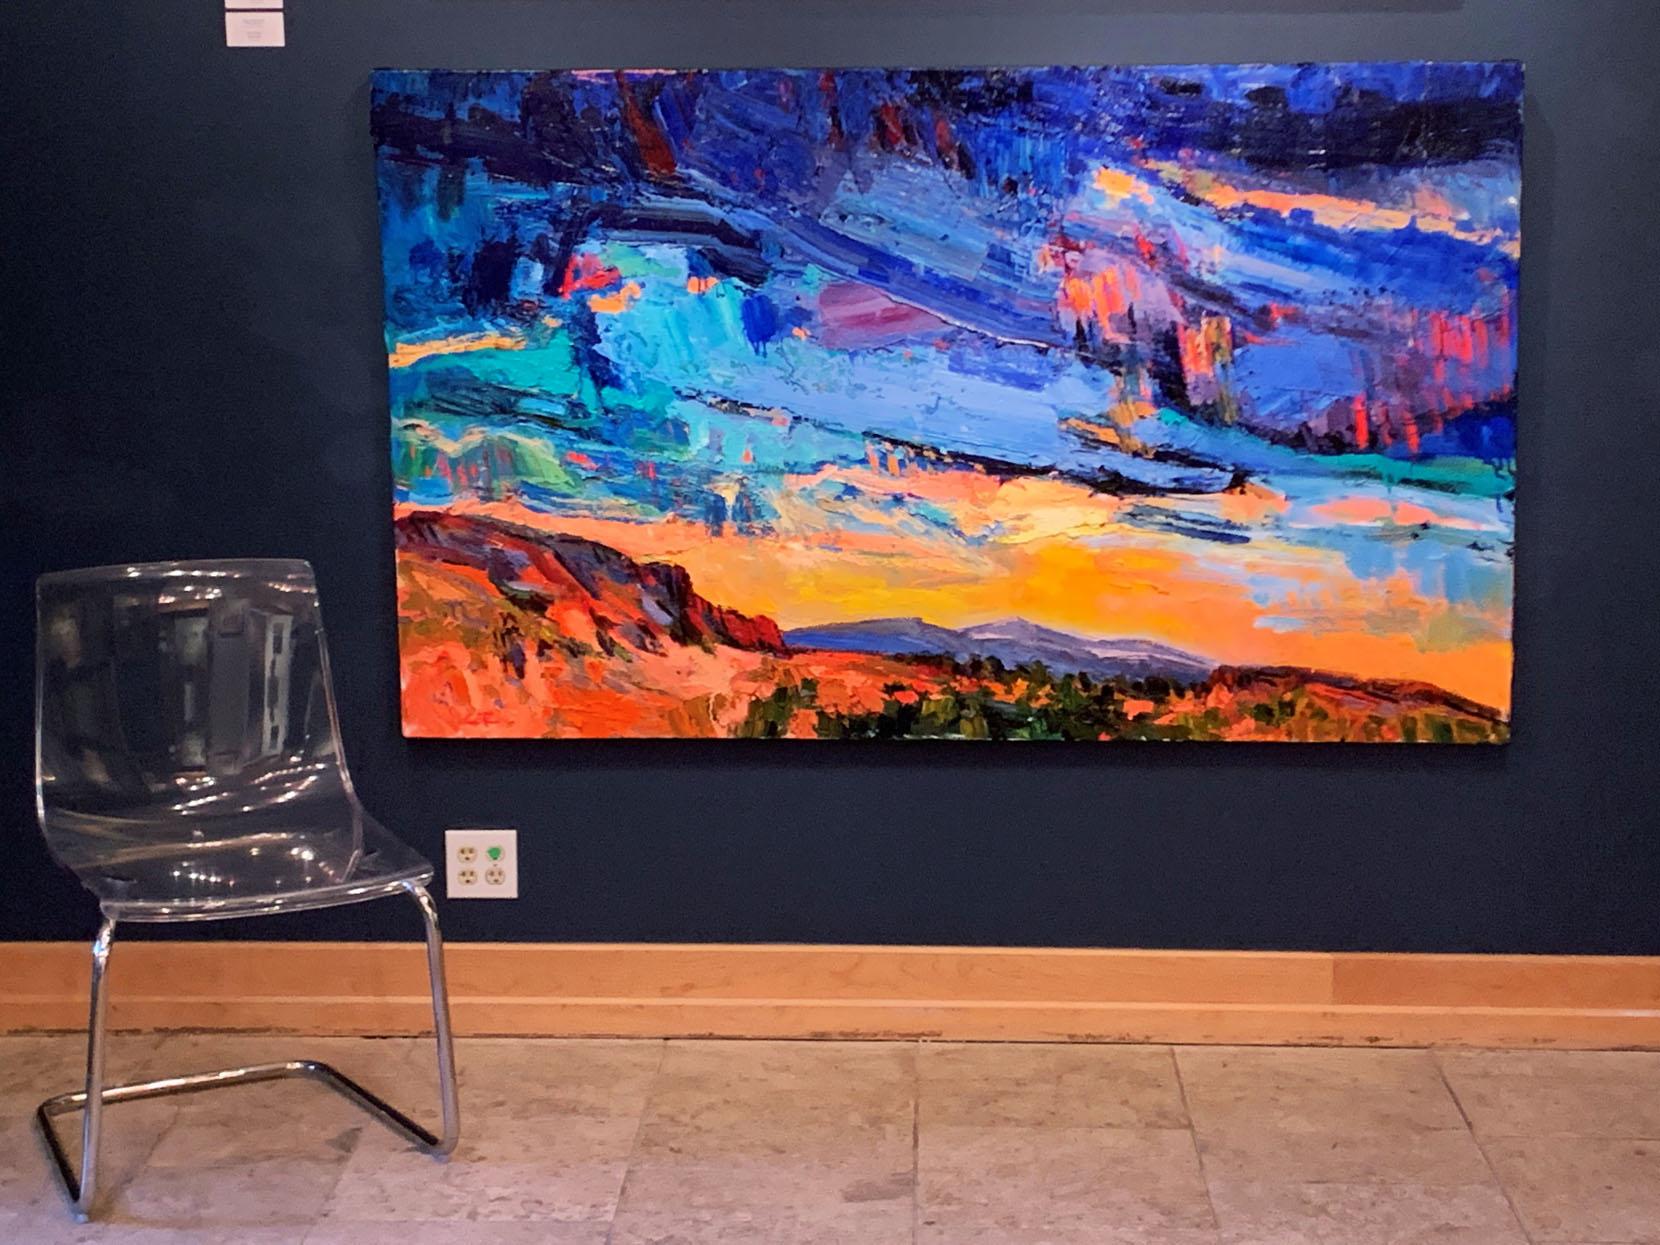 One of the emerging talents of abstract impressionism in the Southwest.  